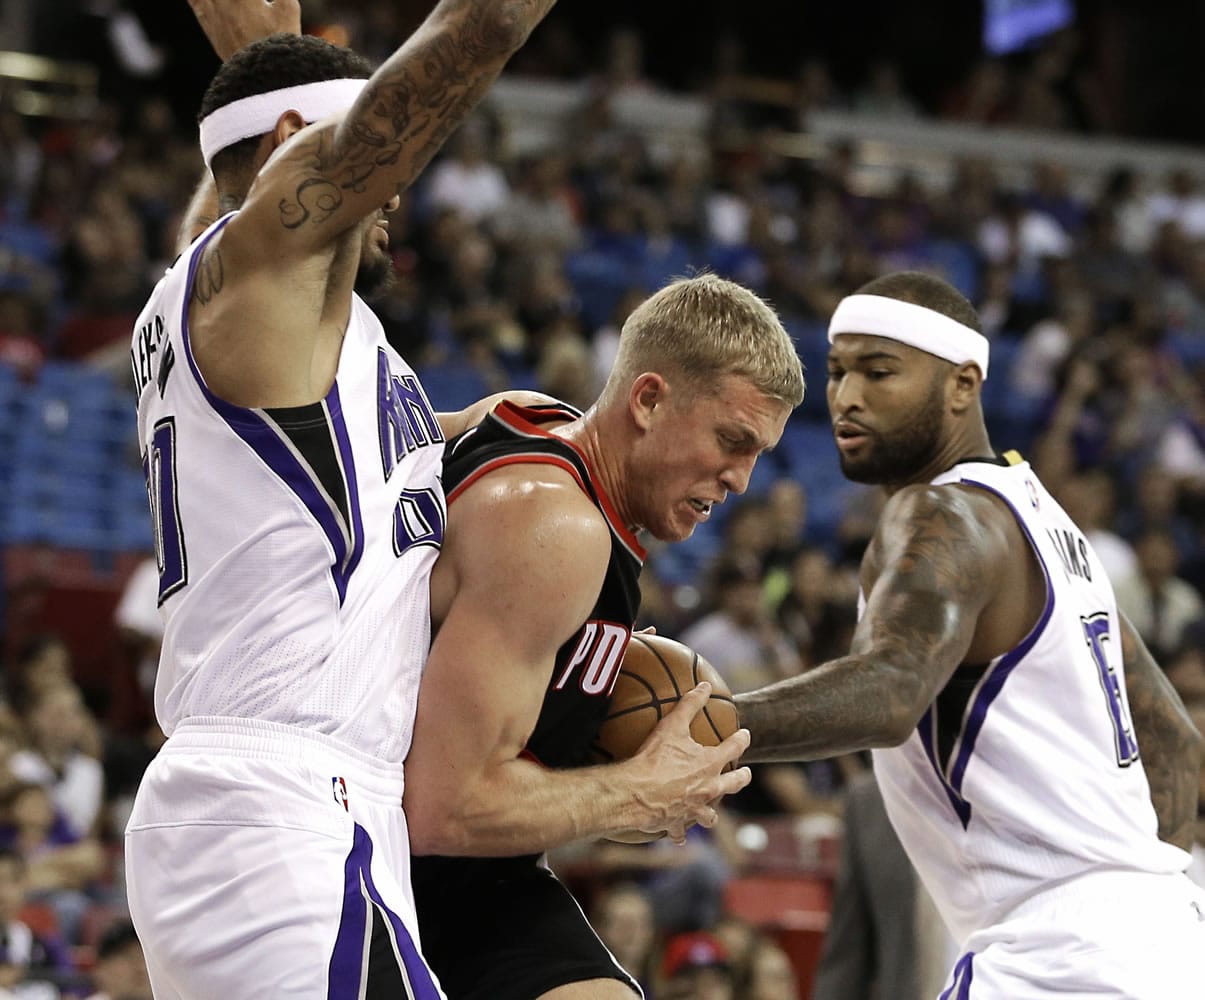 Portland Trail Blazers center Mason Plumlee, center, tries to drive between Sacramento Kings' Willie Cauley-Stein, left, and DeMarcus Cousins during the first quarter of an NBA preseason game in Sacramento, Calif., Saturday, Oct. 10, 2015.